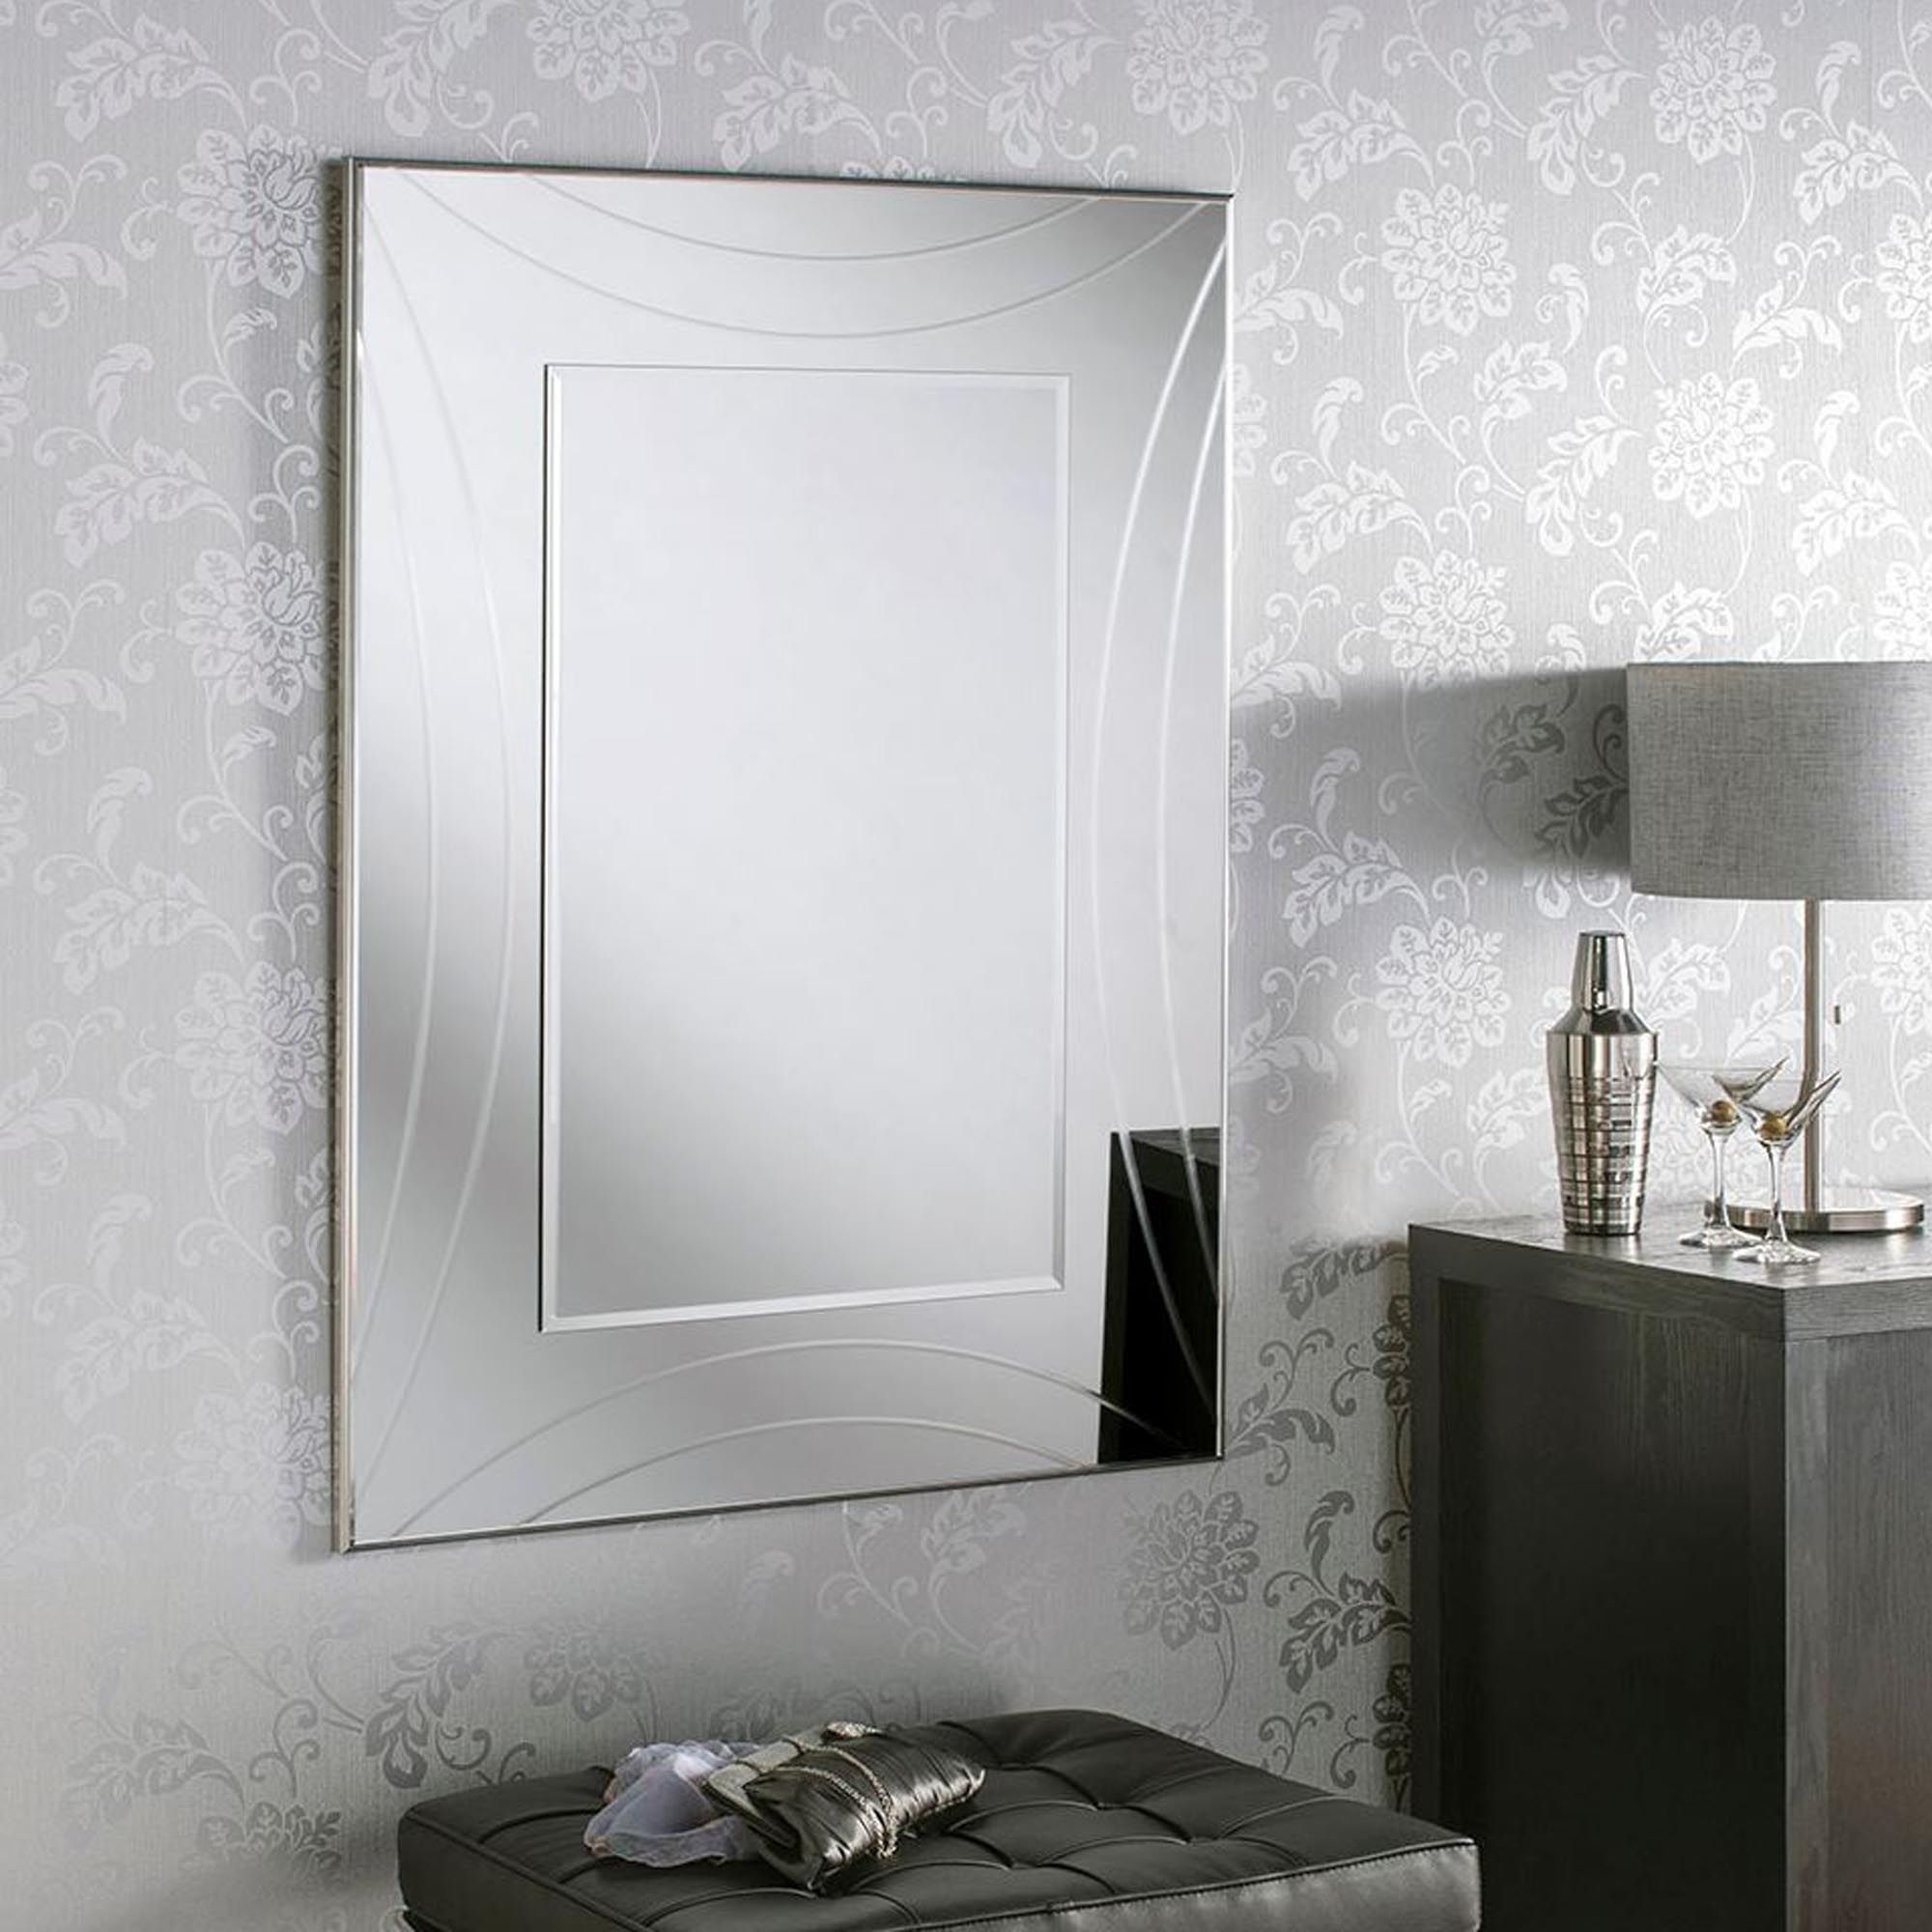 Contemporary Silver Rectangular Wall Mirror | Homesdirect365 Pertaining To Black Beaded Rectangular Wall Mirrors (View 12 of 15)